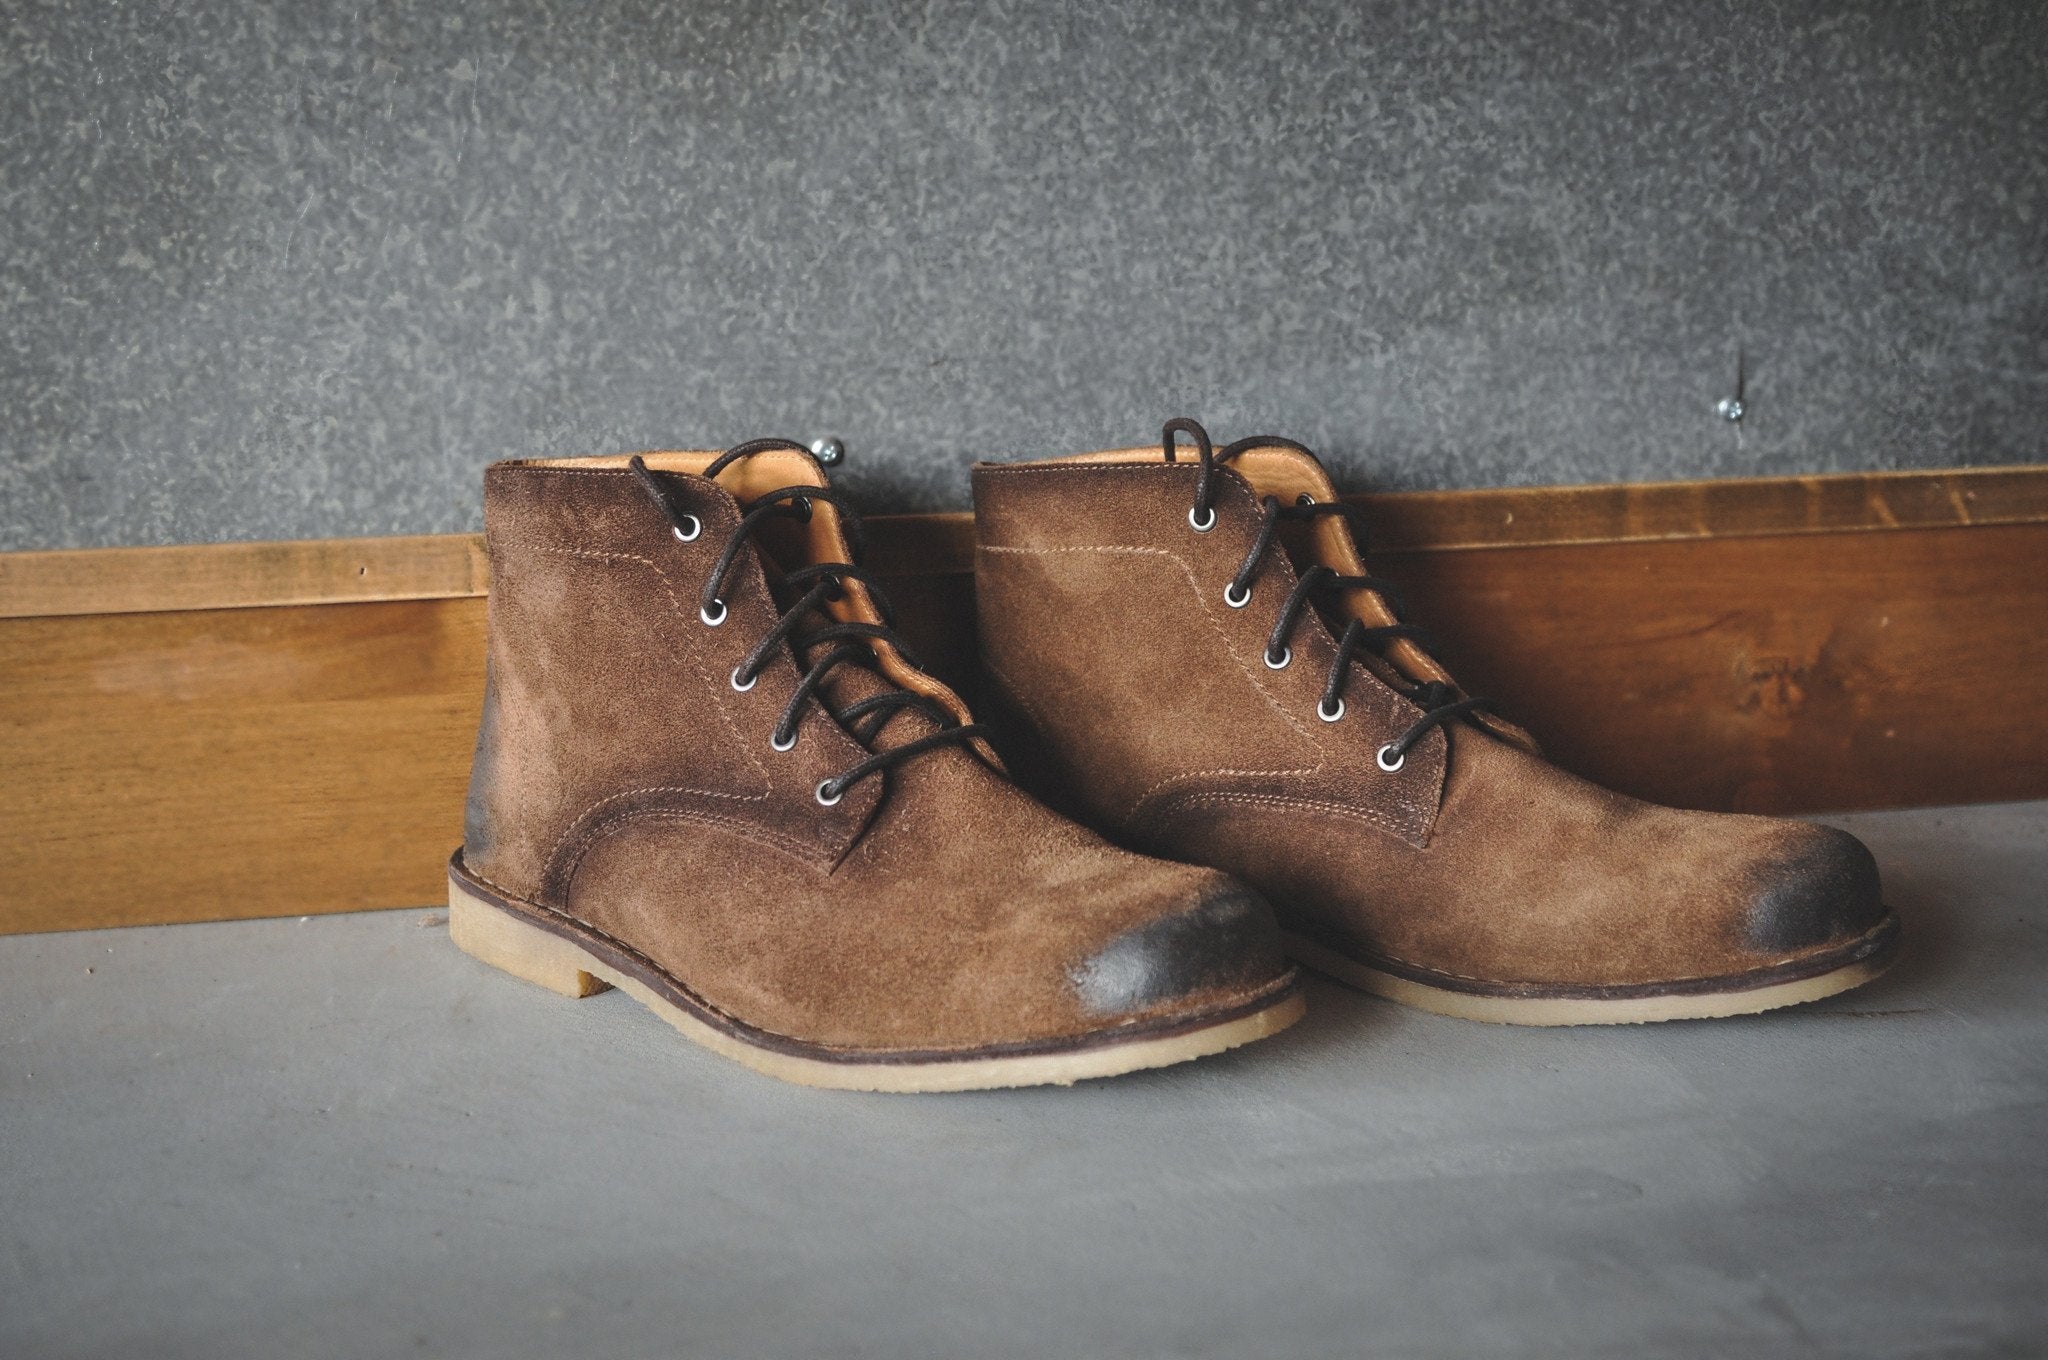 Hound & Hammer The Grover | Men's Burnished Tobacco Suede Ankle Boots